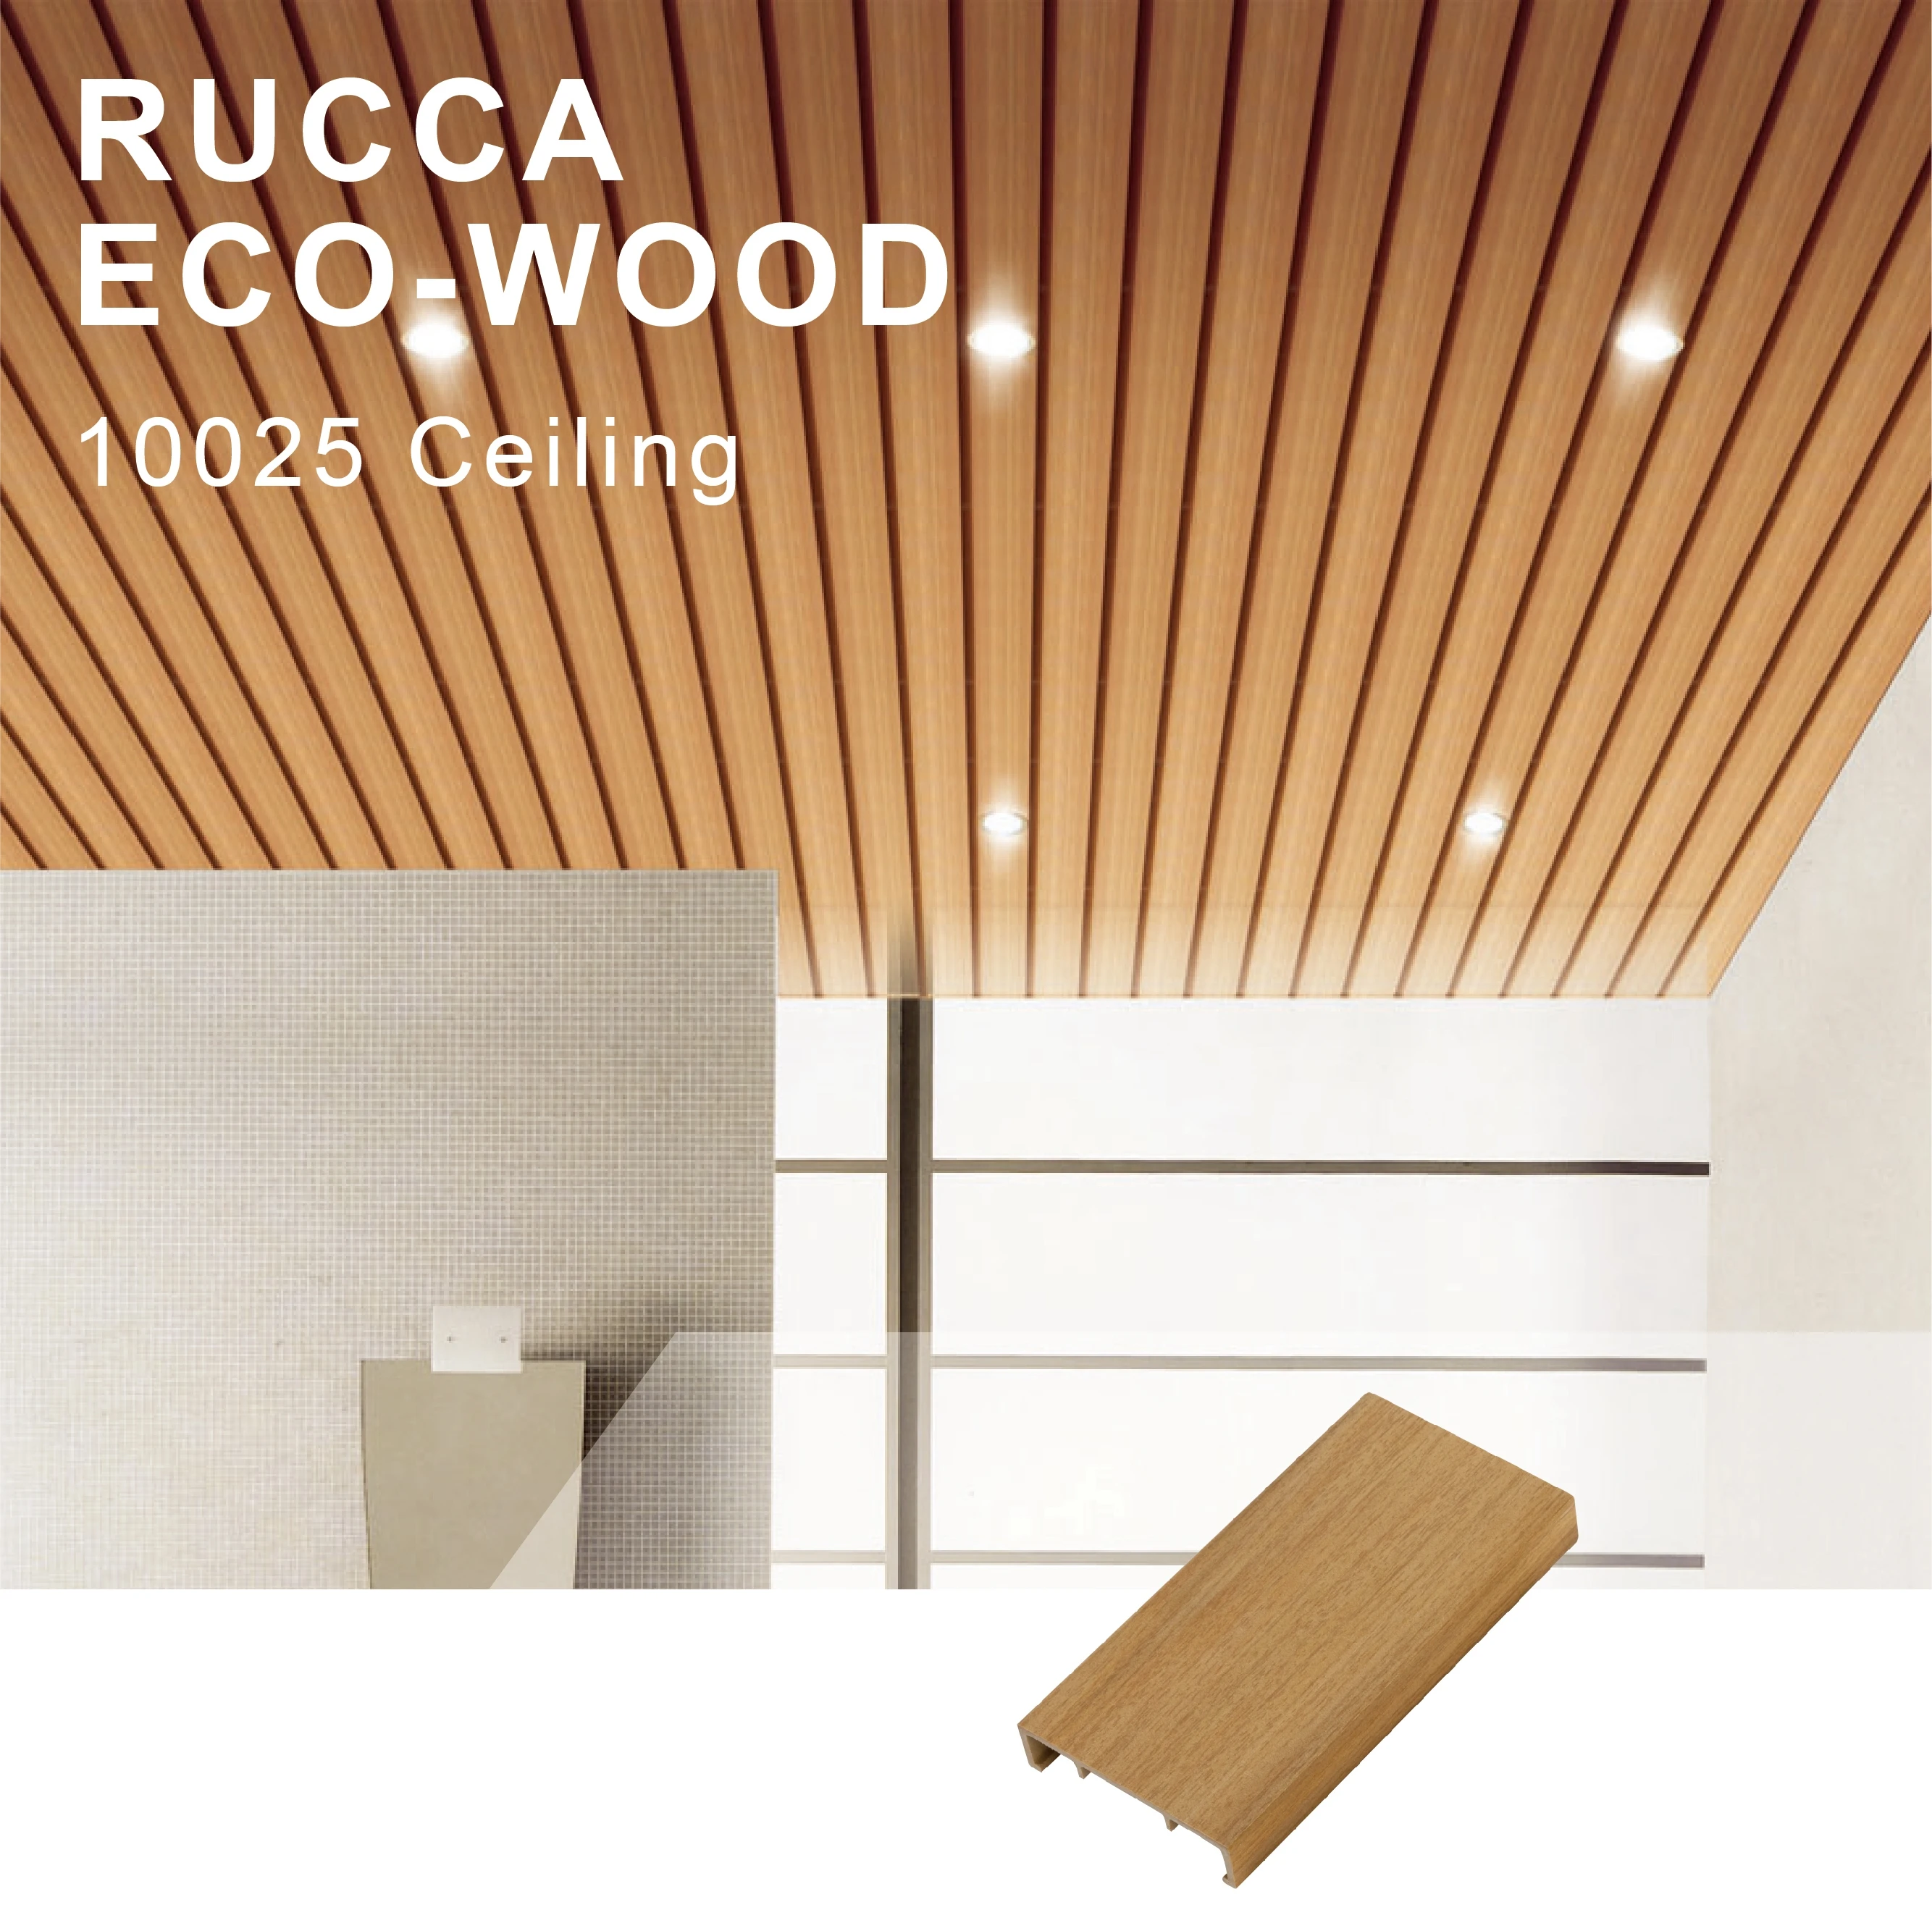 Foshan Rucca Wpc Wood Pvc Plastic Composite Ceiling Tiles Interior Suspended Decoration Ceiling Panels Design 100 25mm In China Buy Pvc Ceiling